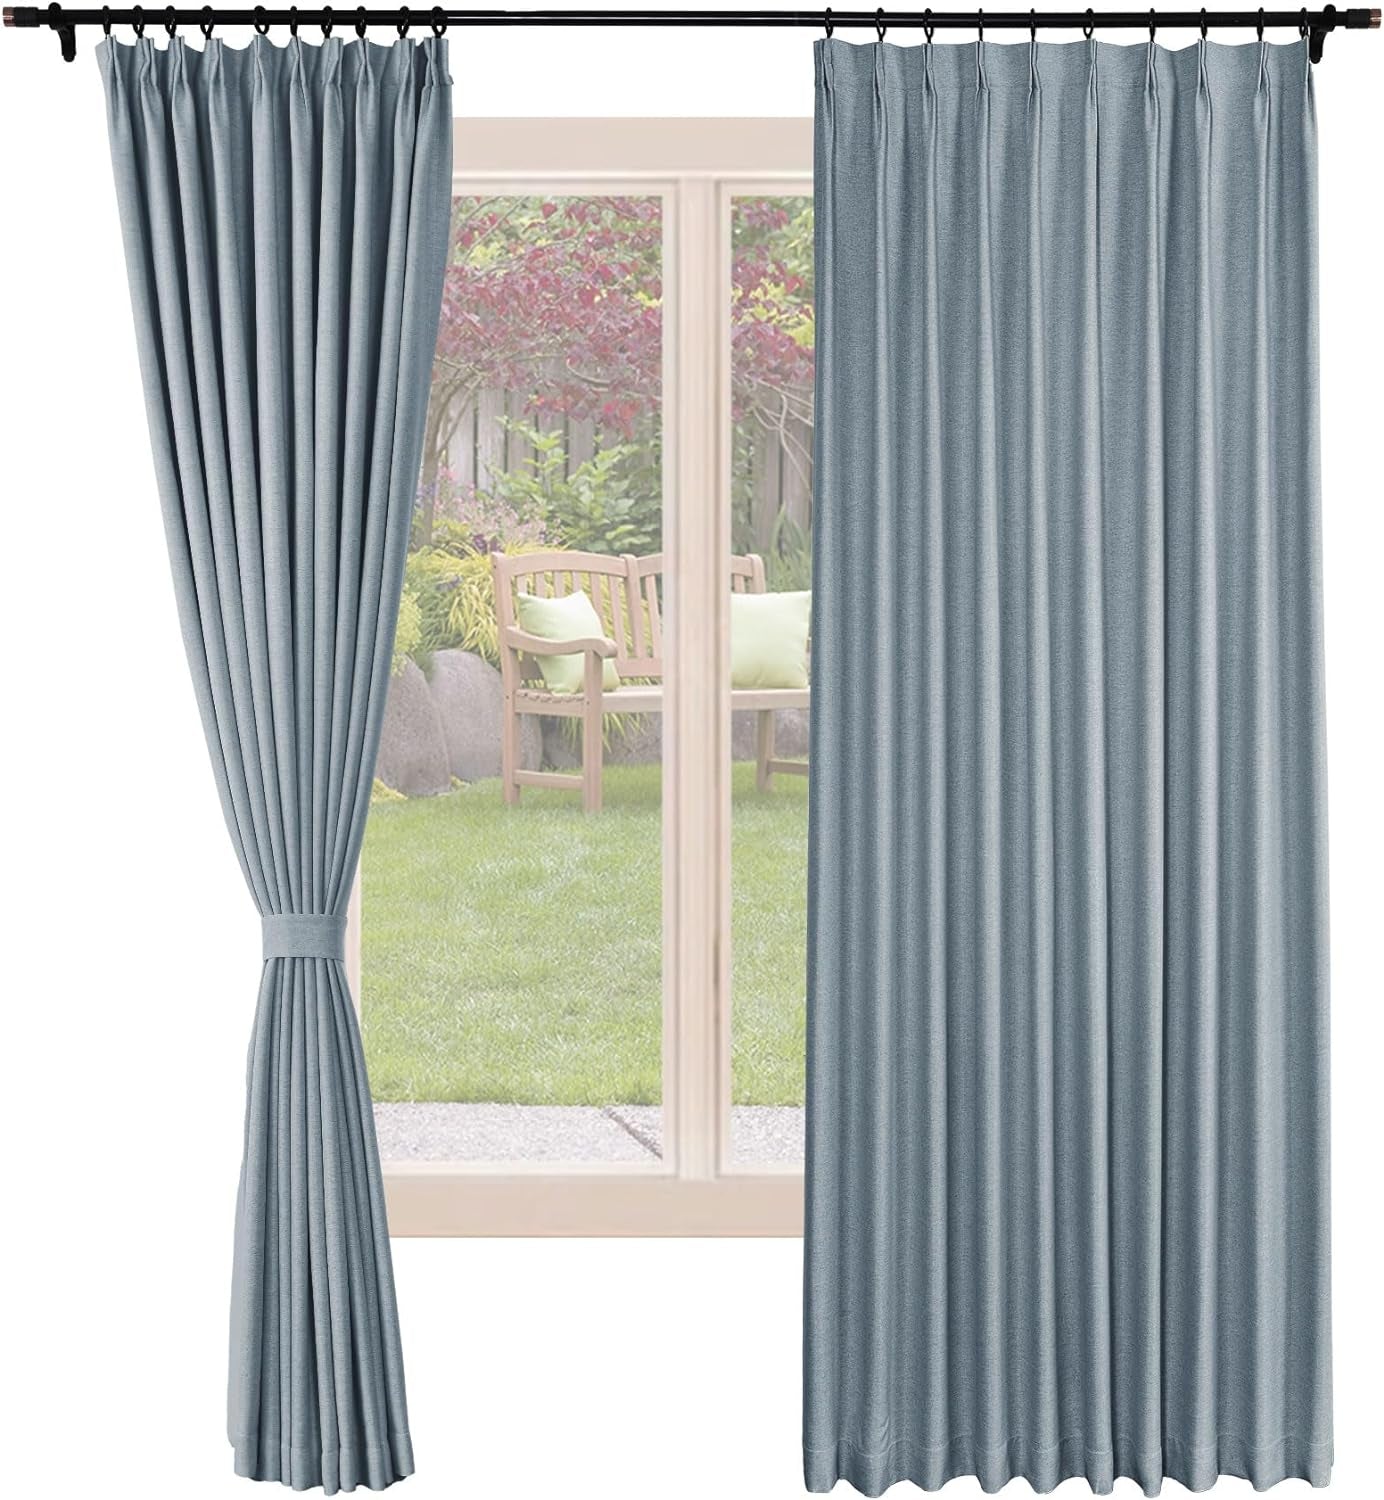 Frelement Blackout Curtains Natural Linen Curtains Pinch Pleat Drapery Panels for Living Room Thermal Insulated Curtains, 52" W X 63" L, 2 Panels, Oasis  Frelement 17 Grey Blue (52Wx84L Inch)*2 